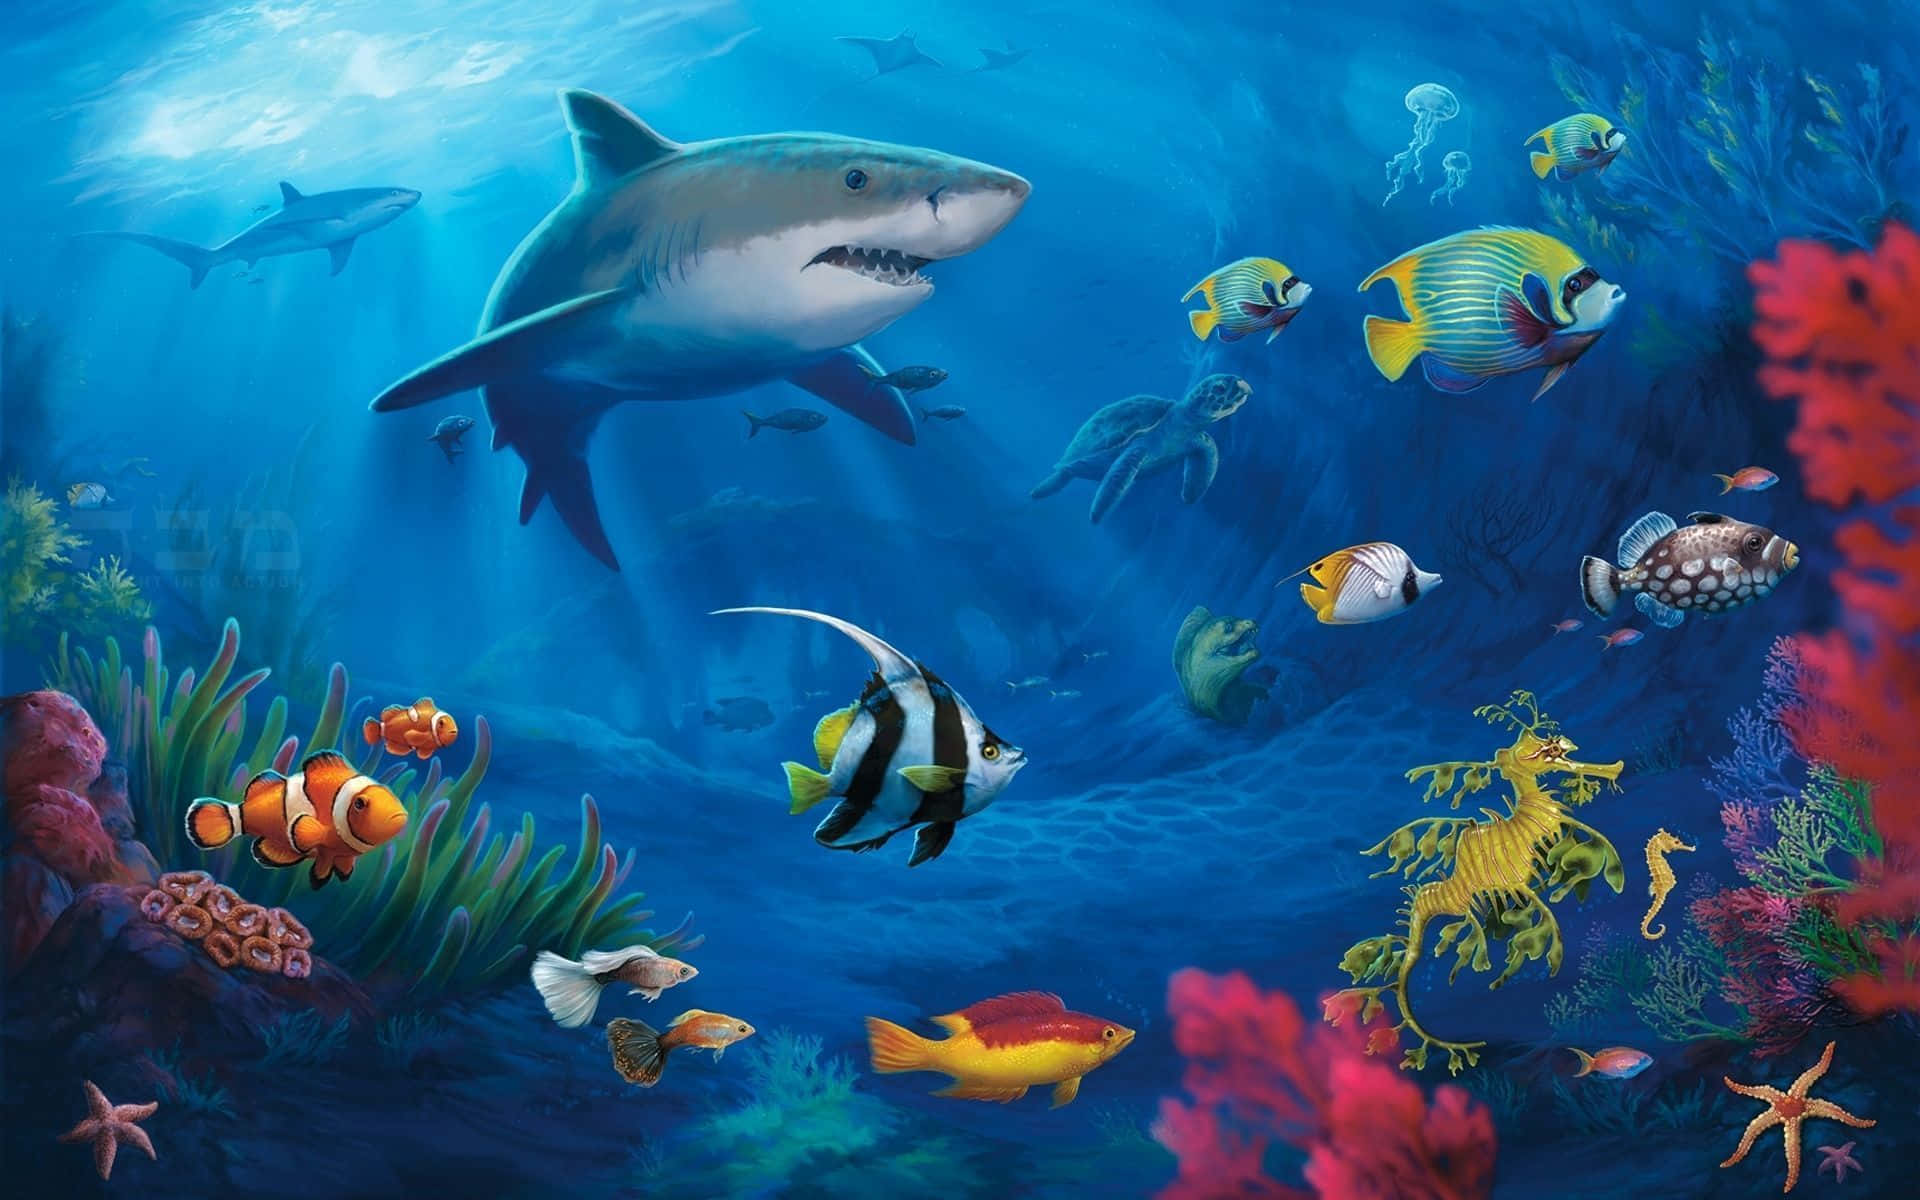 A Painting Of A Shark And Other Fish In The Ocean Wallpaper